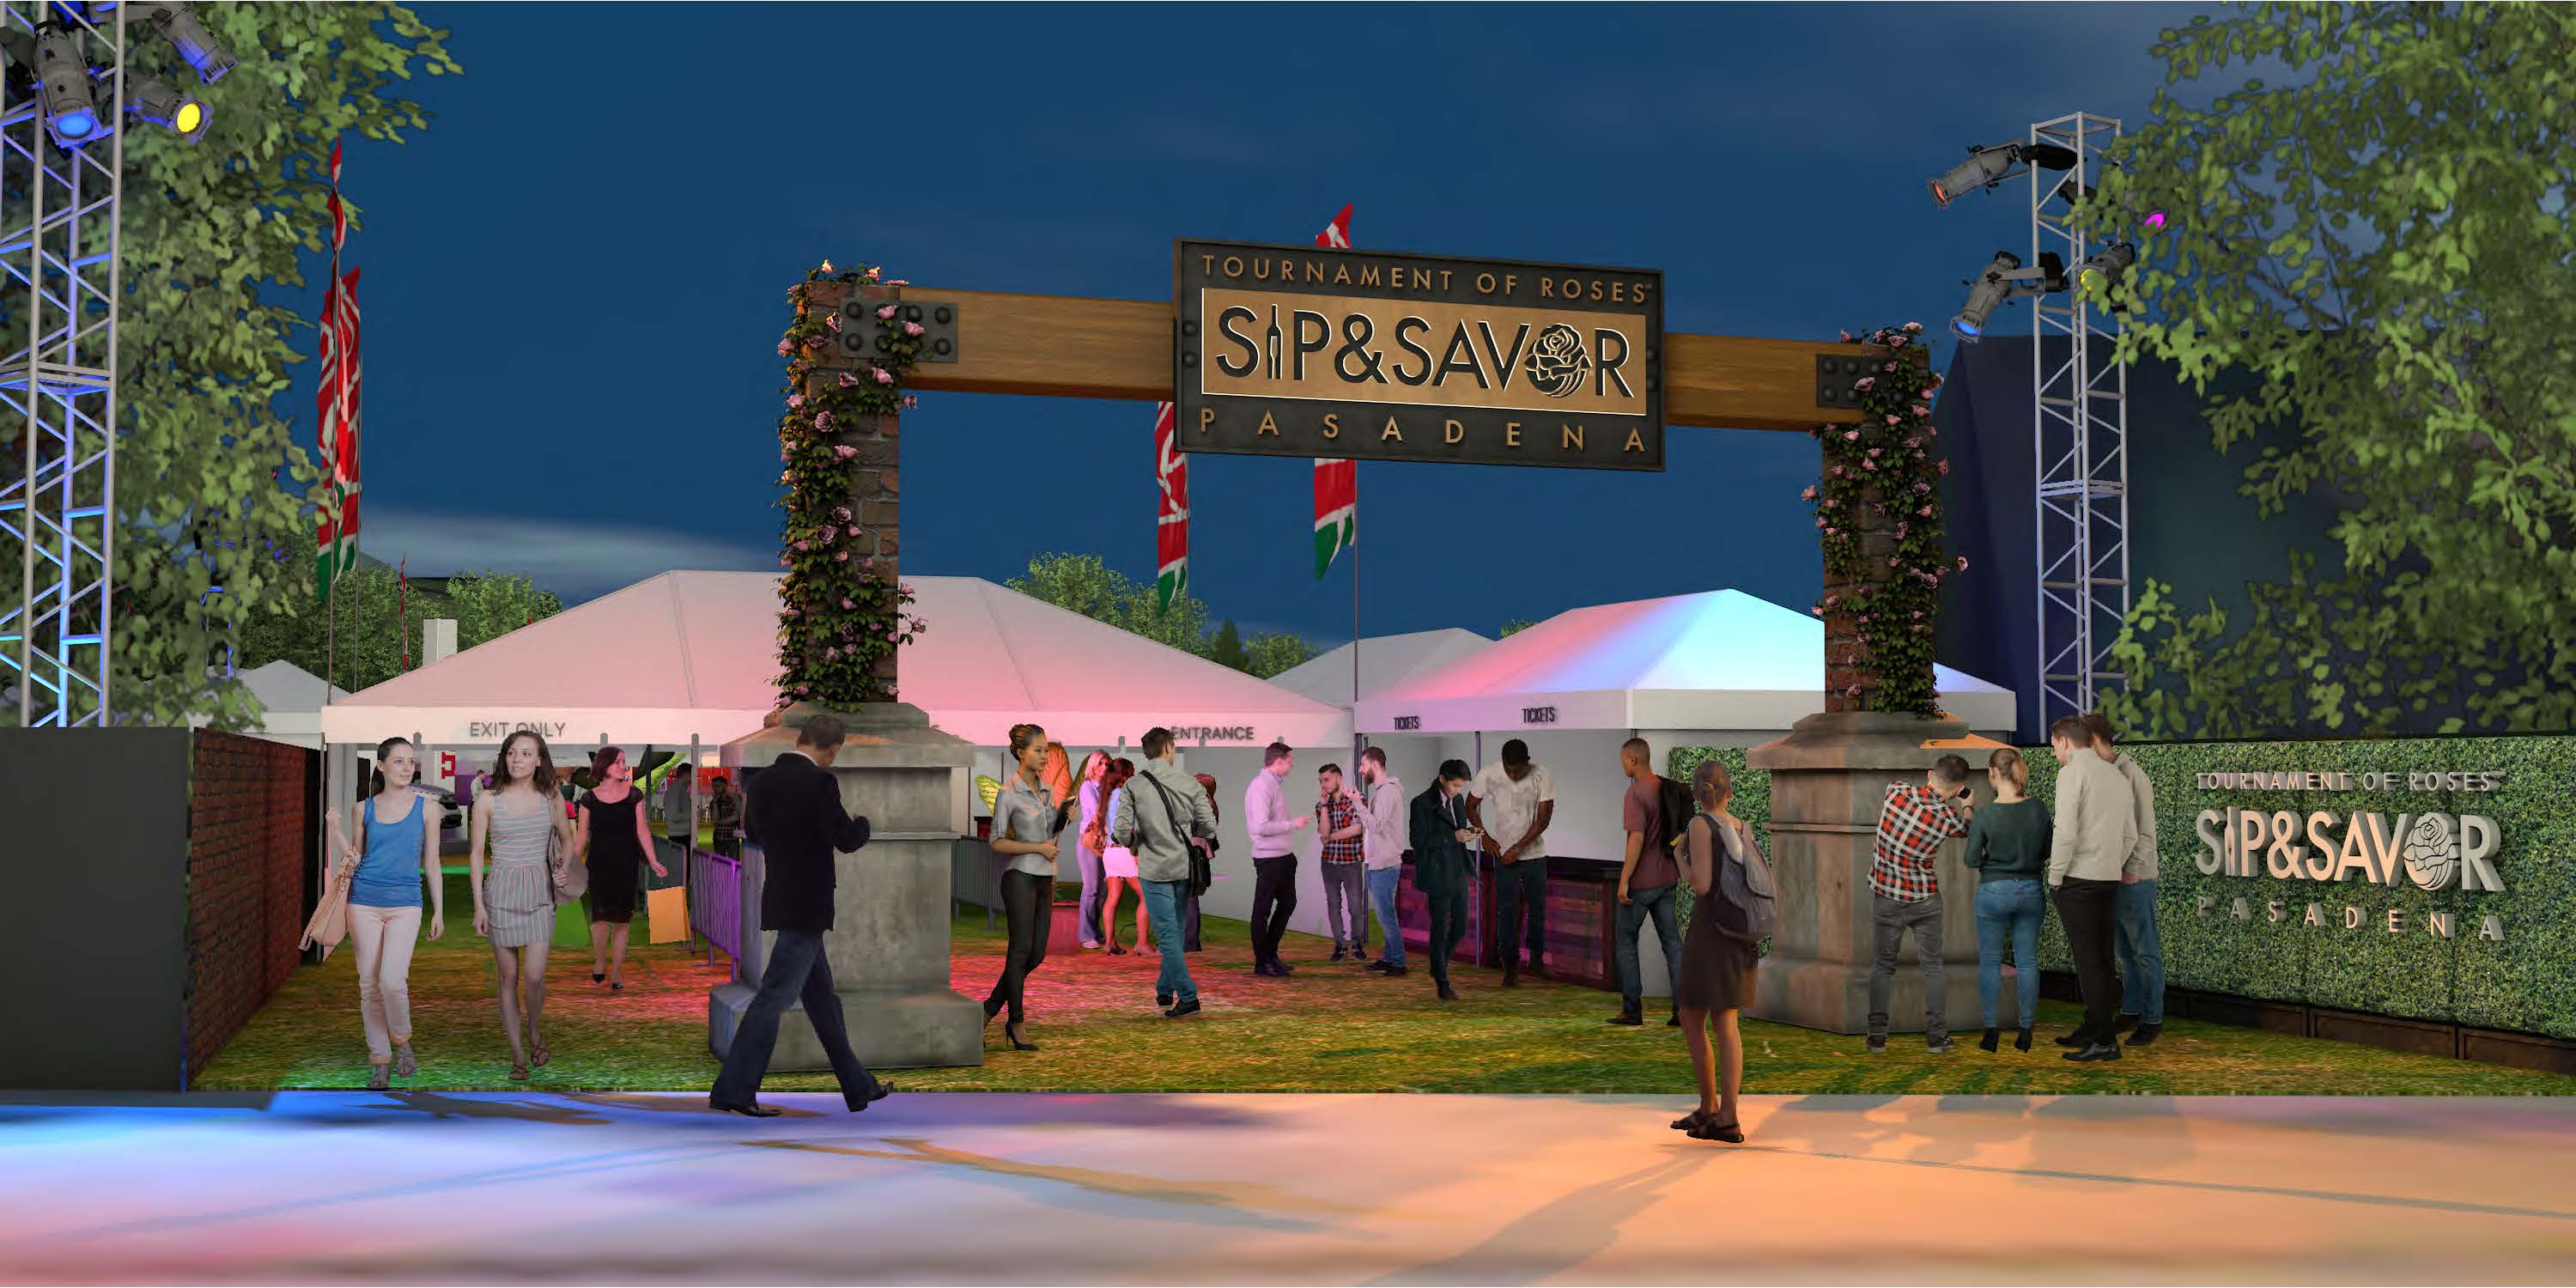 Celebrate New End of Year Tradition at Pasadena Tournament of Roses SIP & SAVOR!